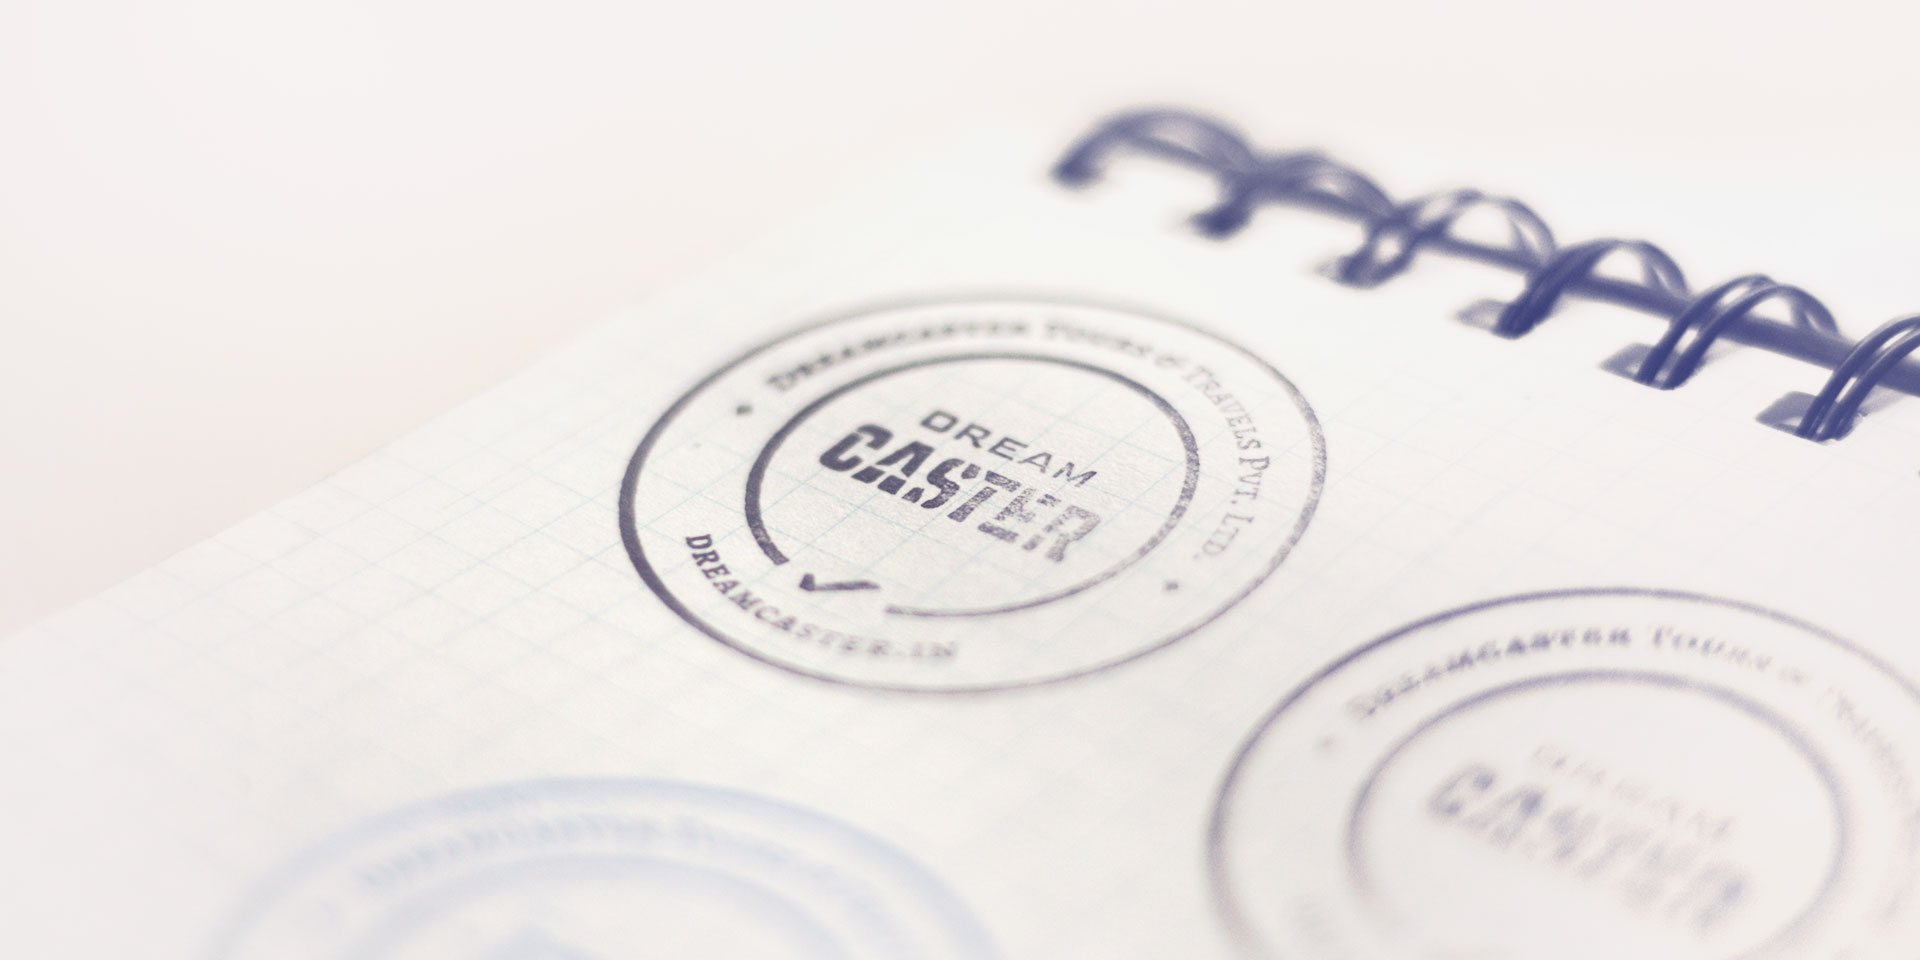 Dream Caster Tours and Travels - Branding - Stamp printed